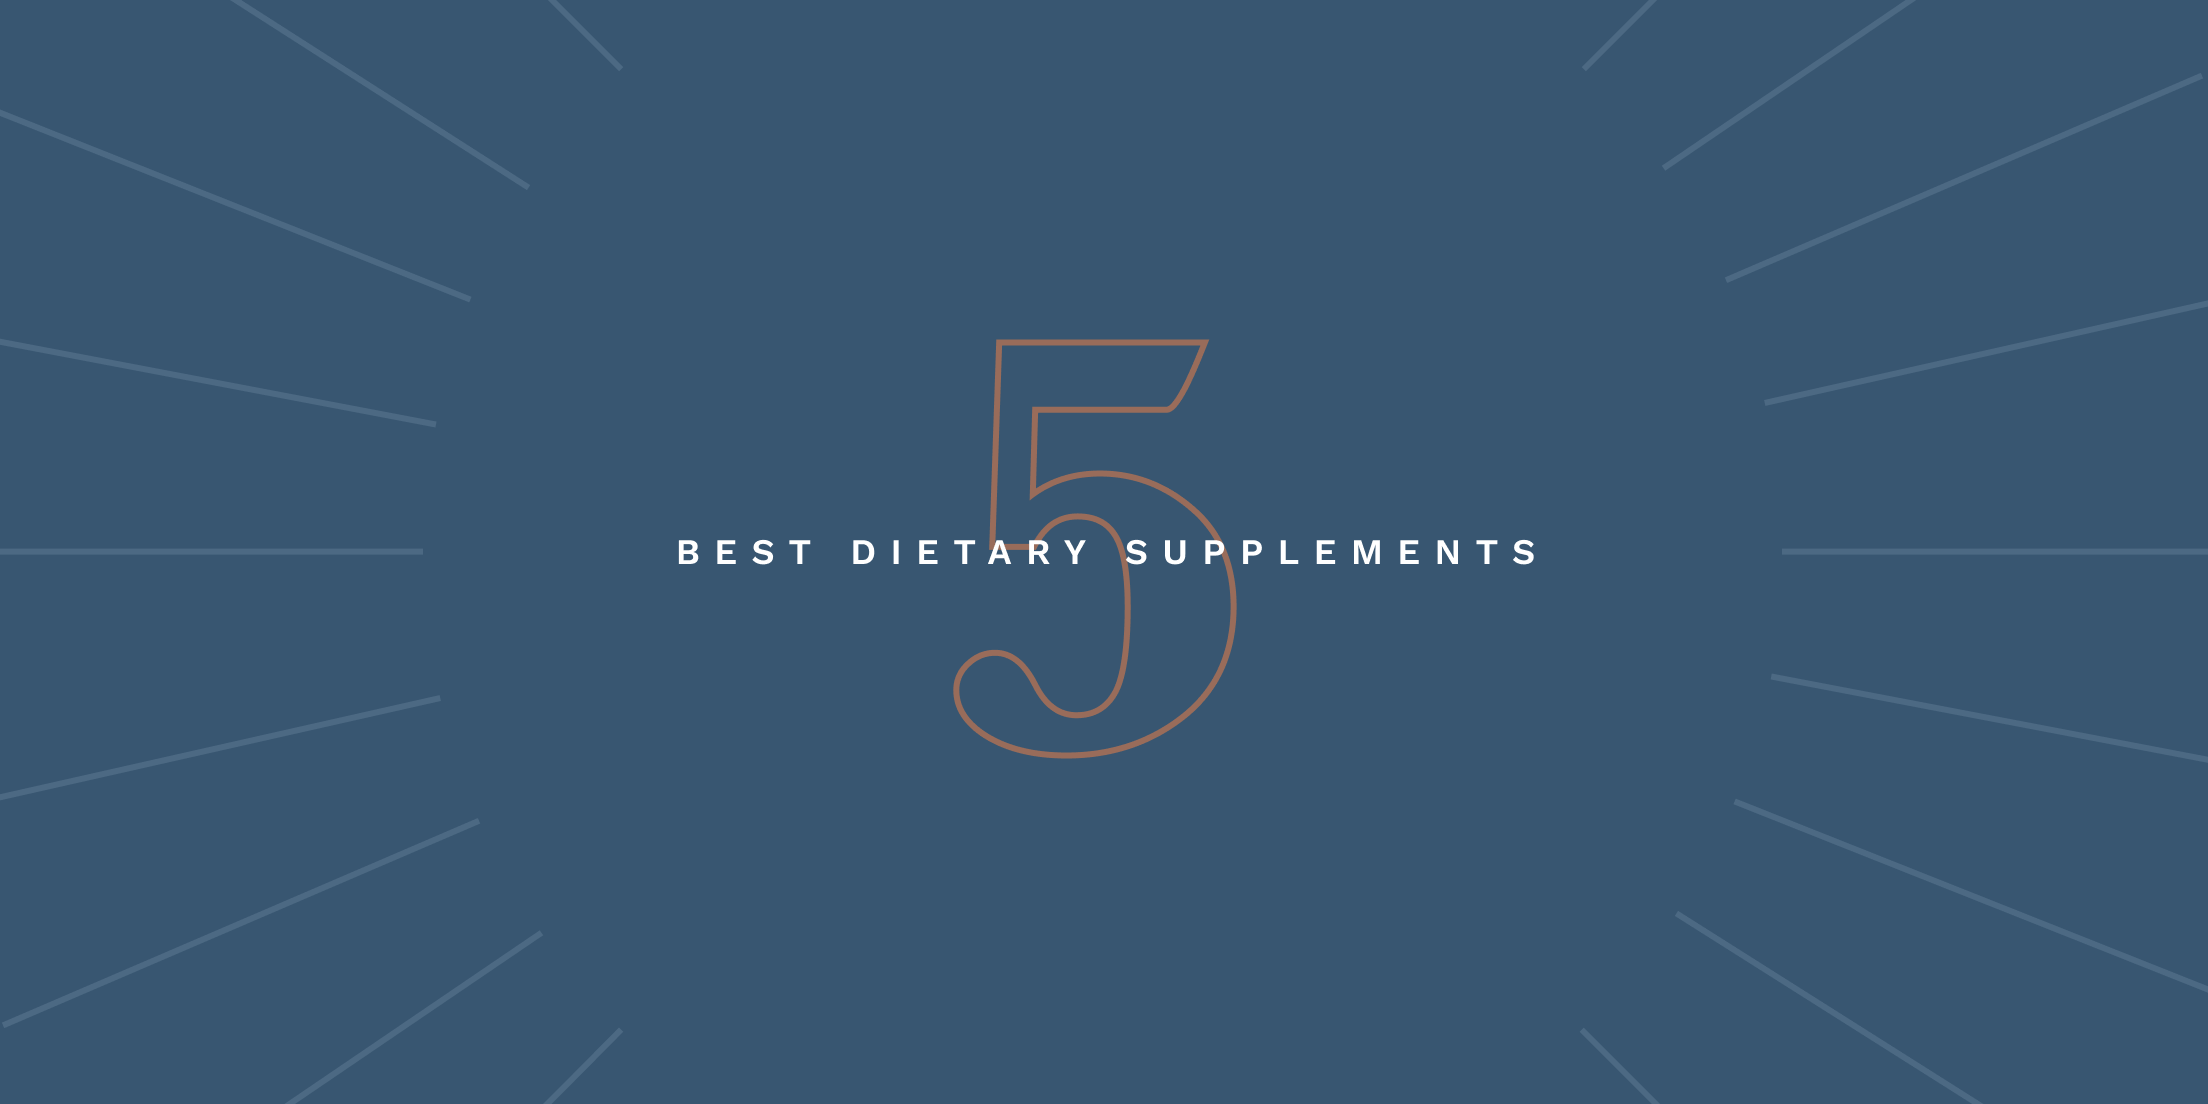 5 Best Dietary Supplements to Help With Autism